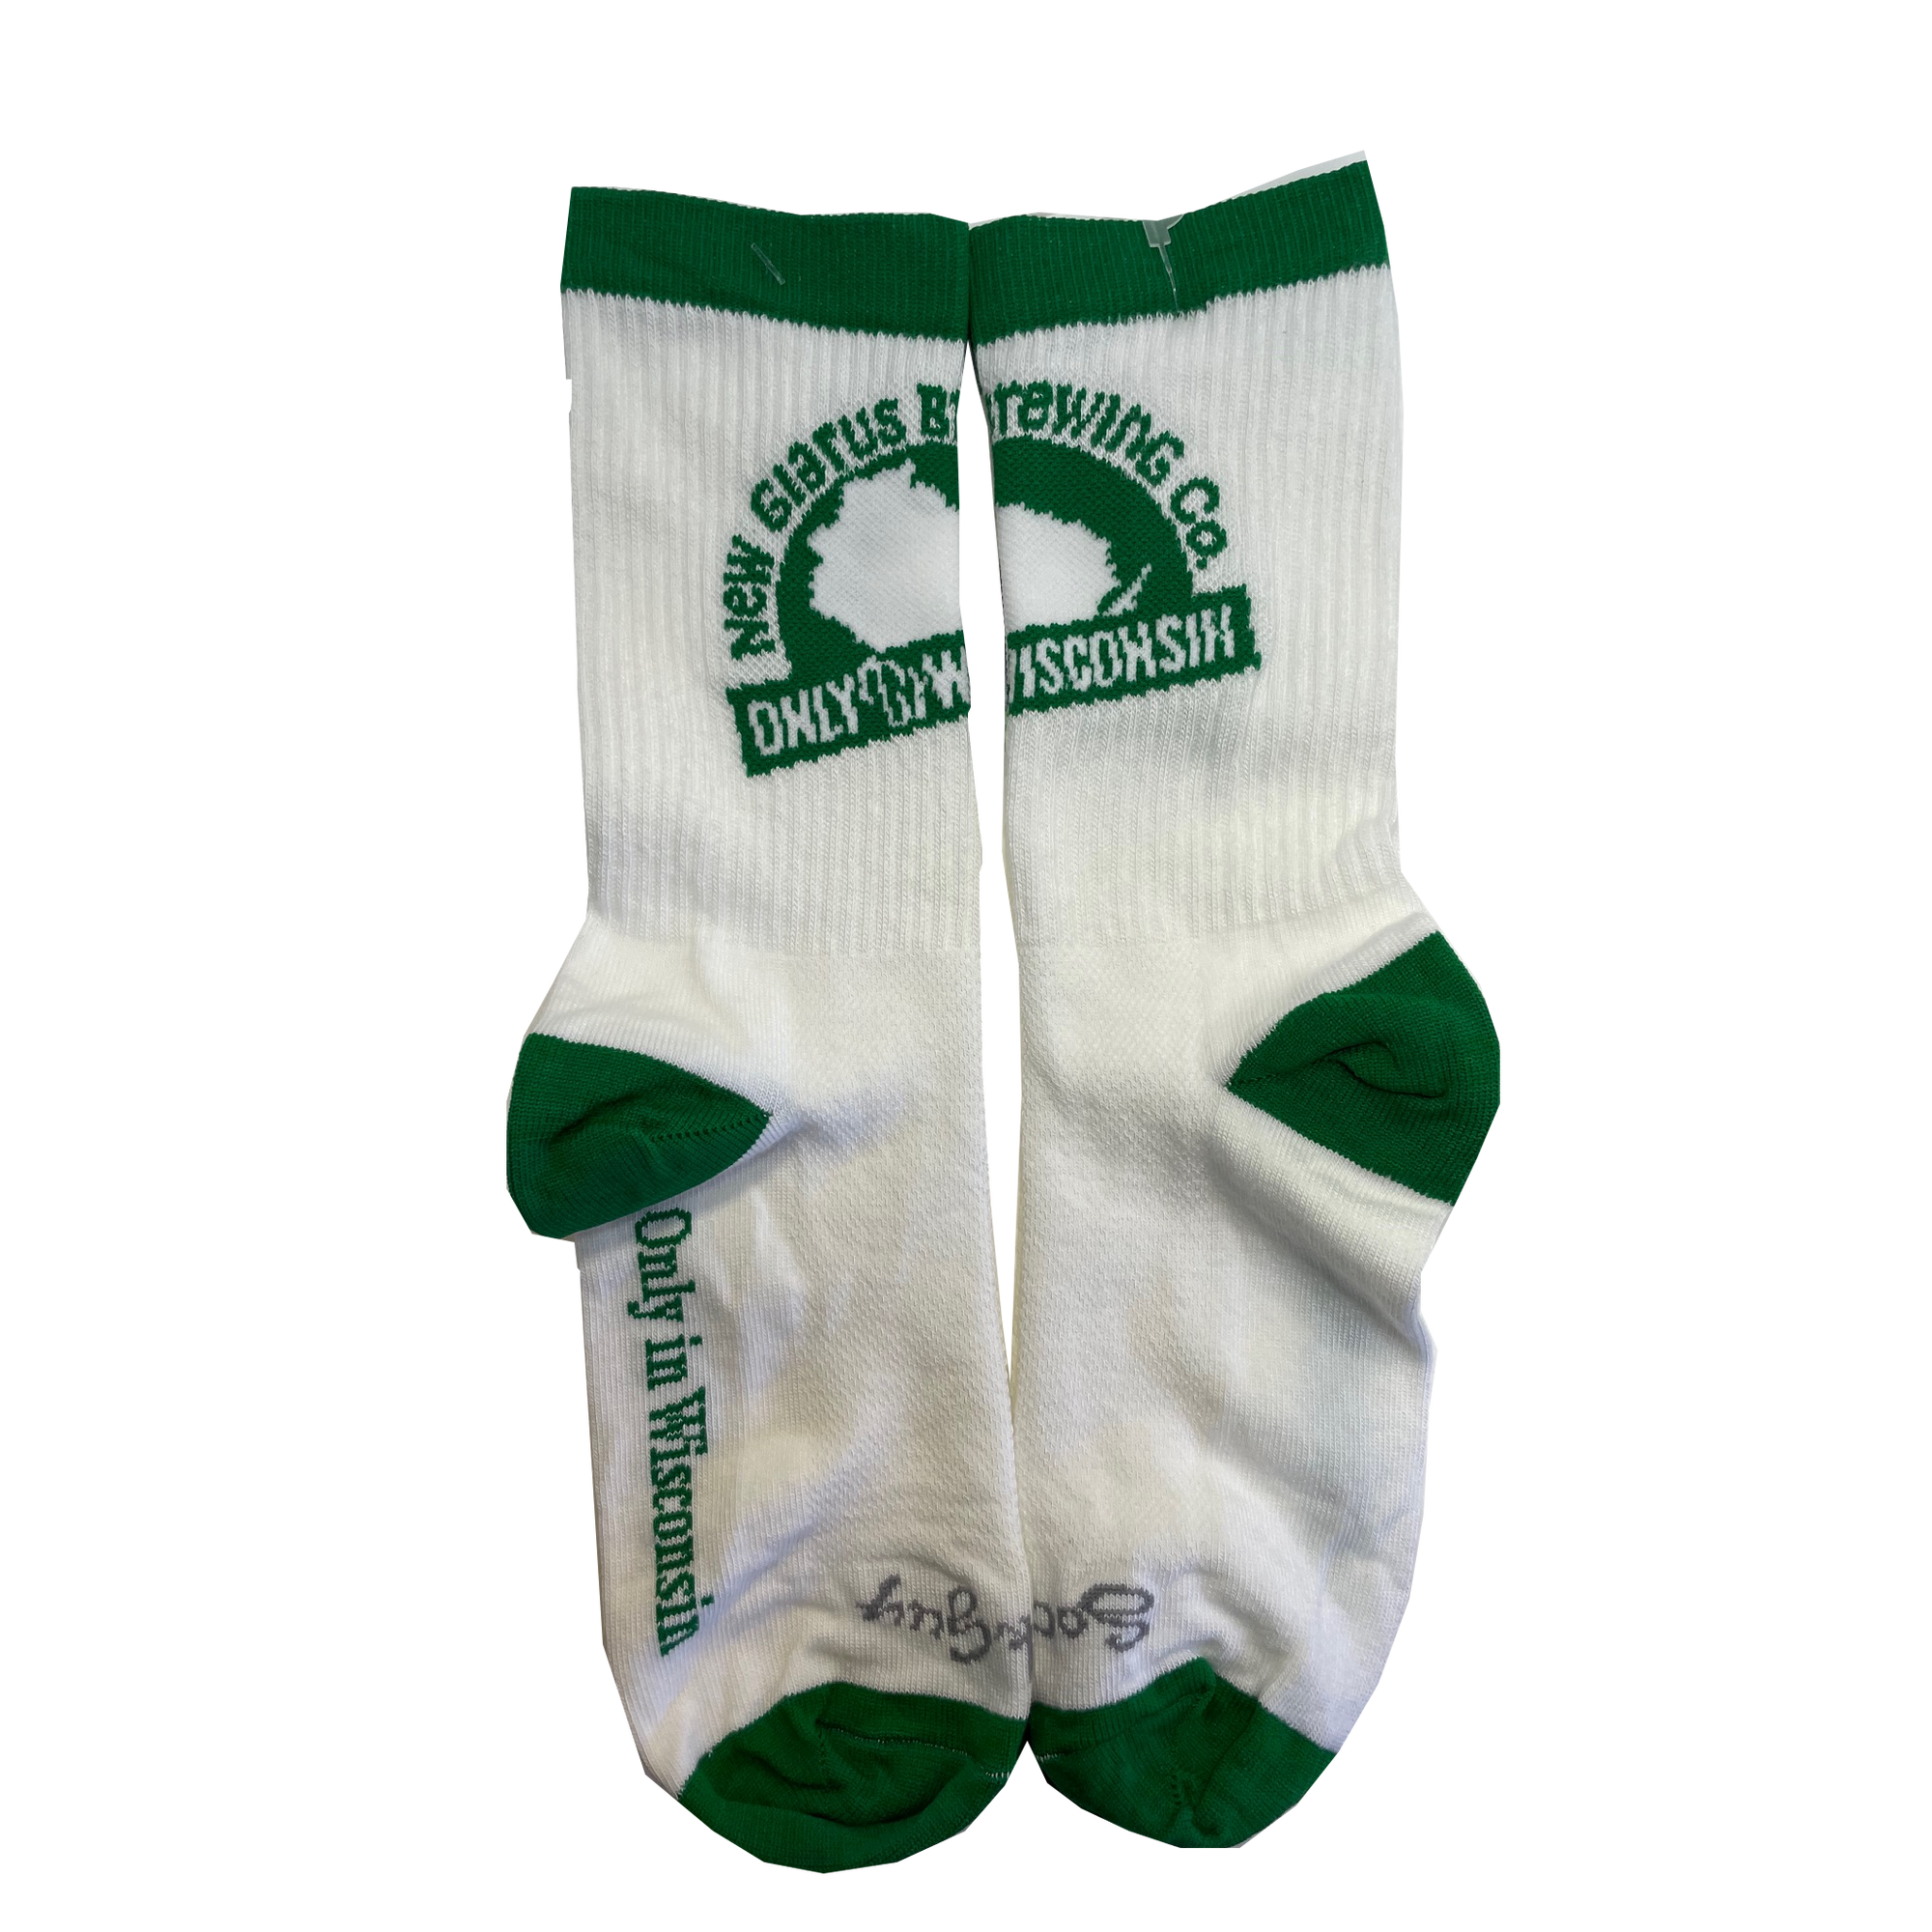 White socks with green toe, heel and top band. Features a green New Glarus Brewing Co. Only In Wisconsin logo.